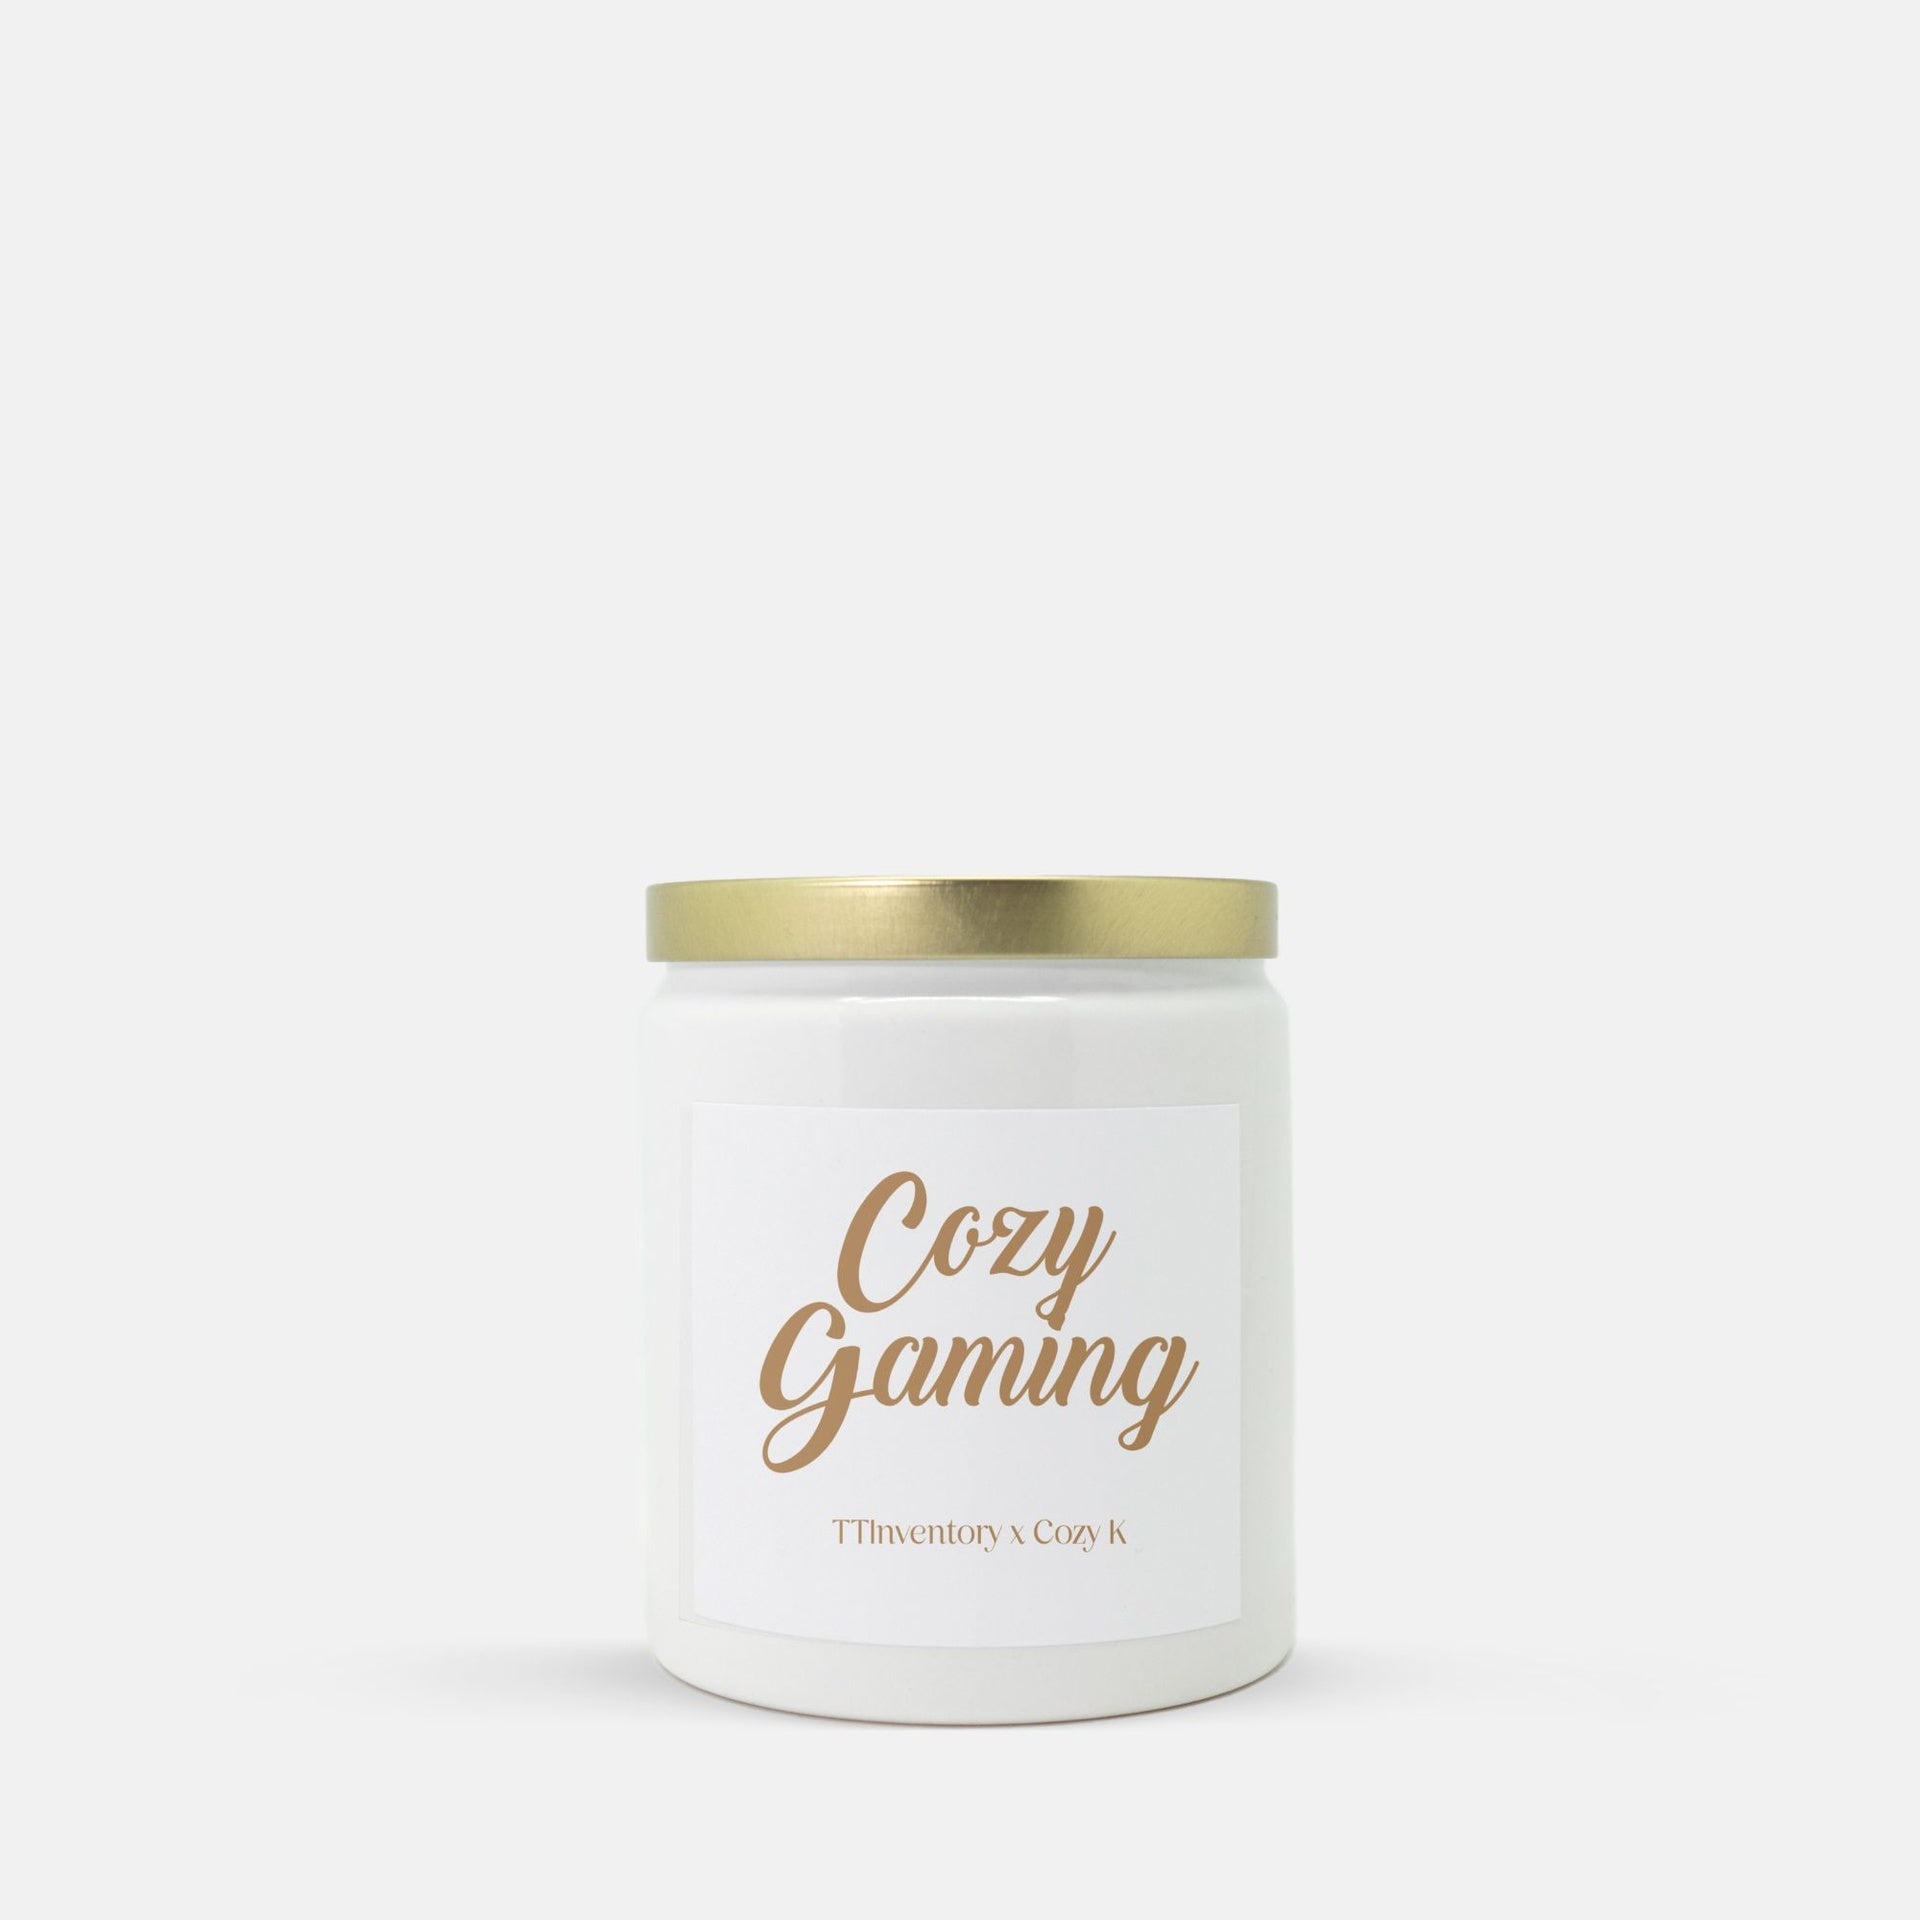 Cozy Gaming 8oz Ceramic Candle | Cozy Gamer Candles Threads & Thistles Inventory 